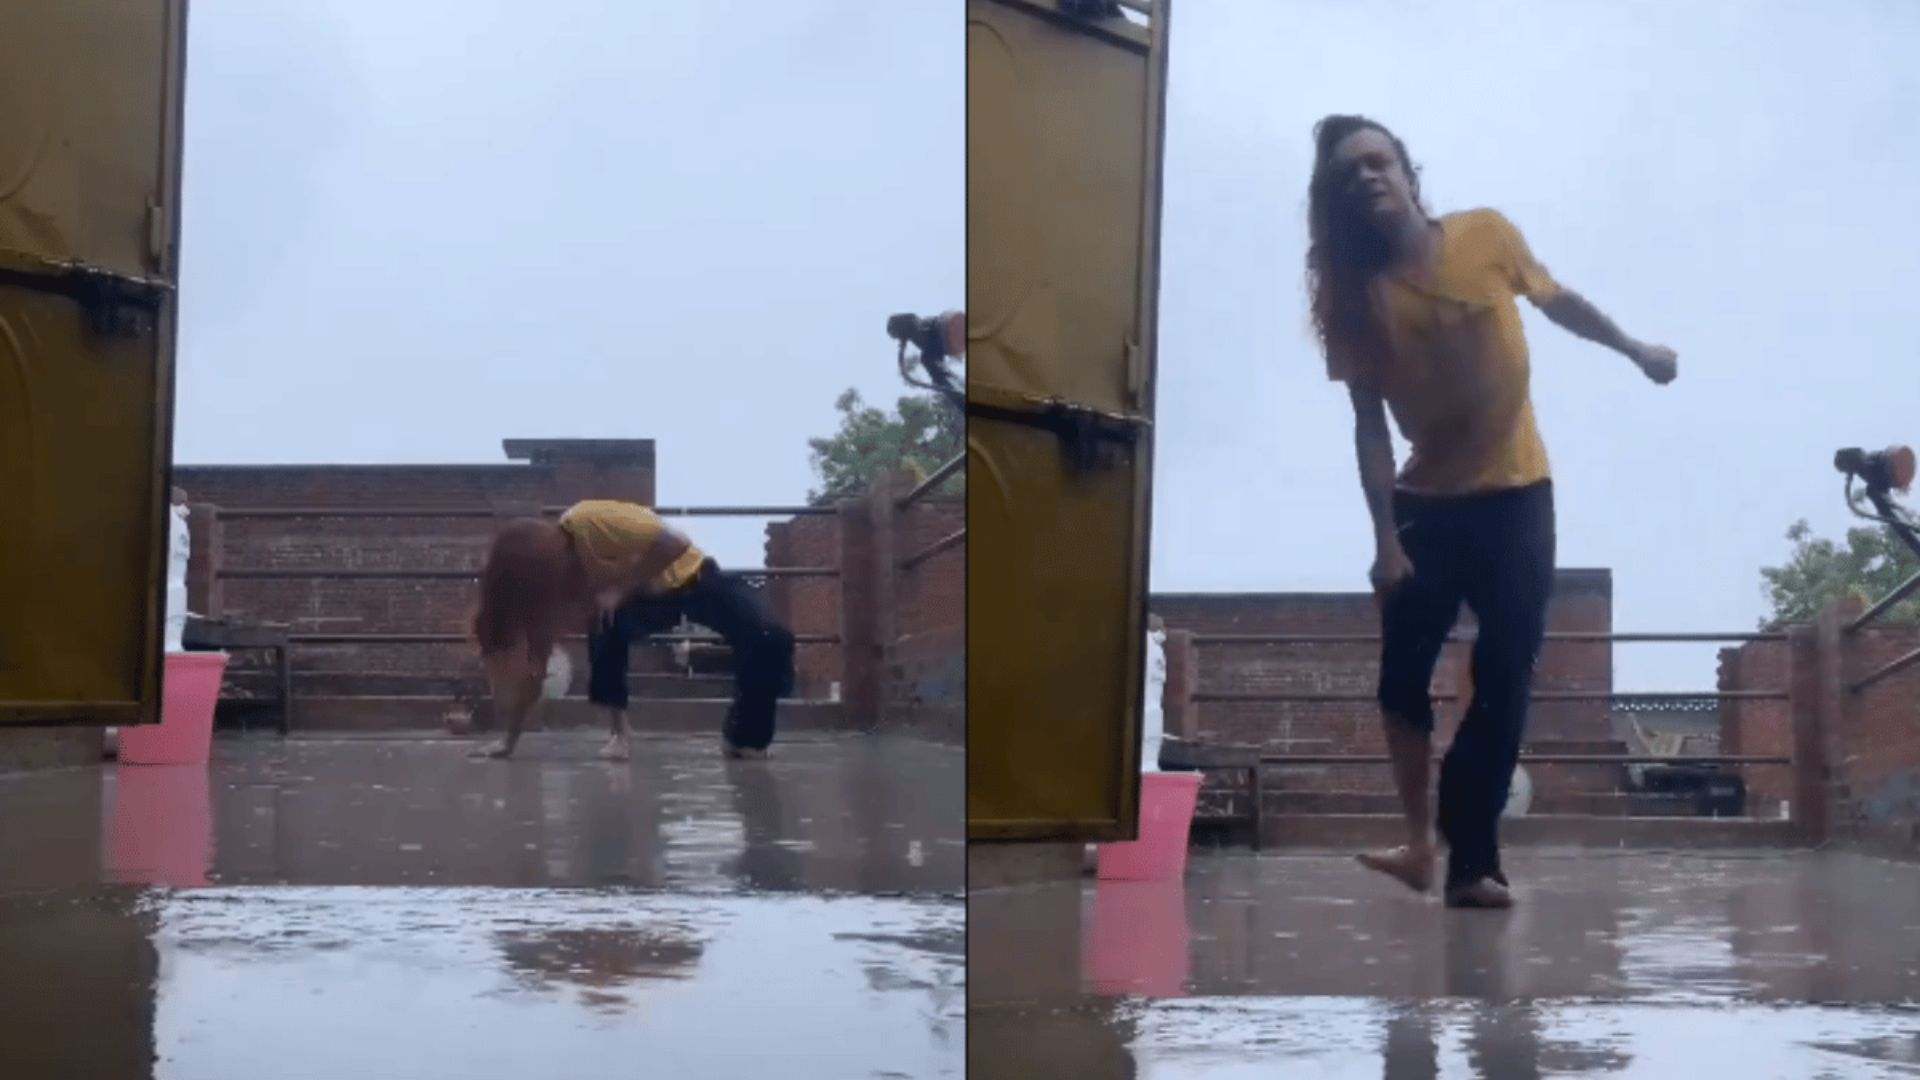 Watch: Viral Dance Video Turns Painful as Man Slips in the Rain, Sparks Safety Concerns